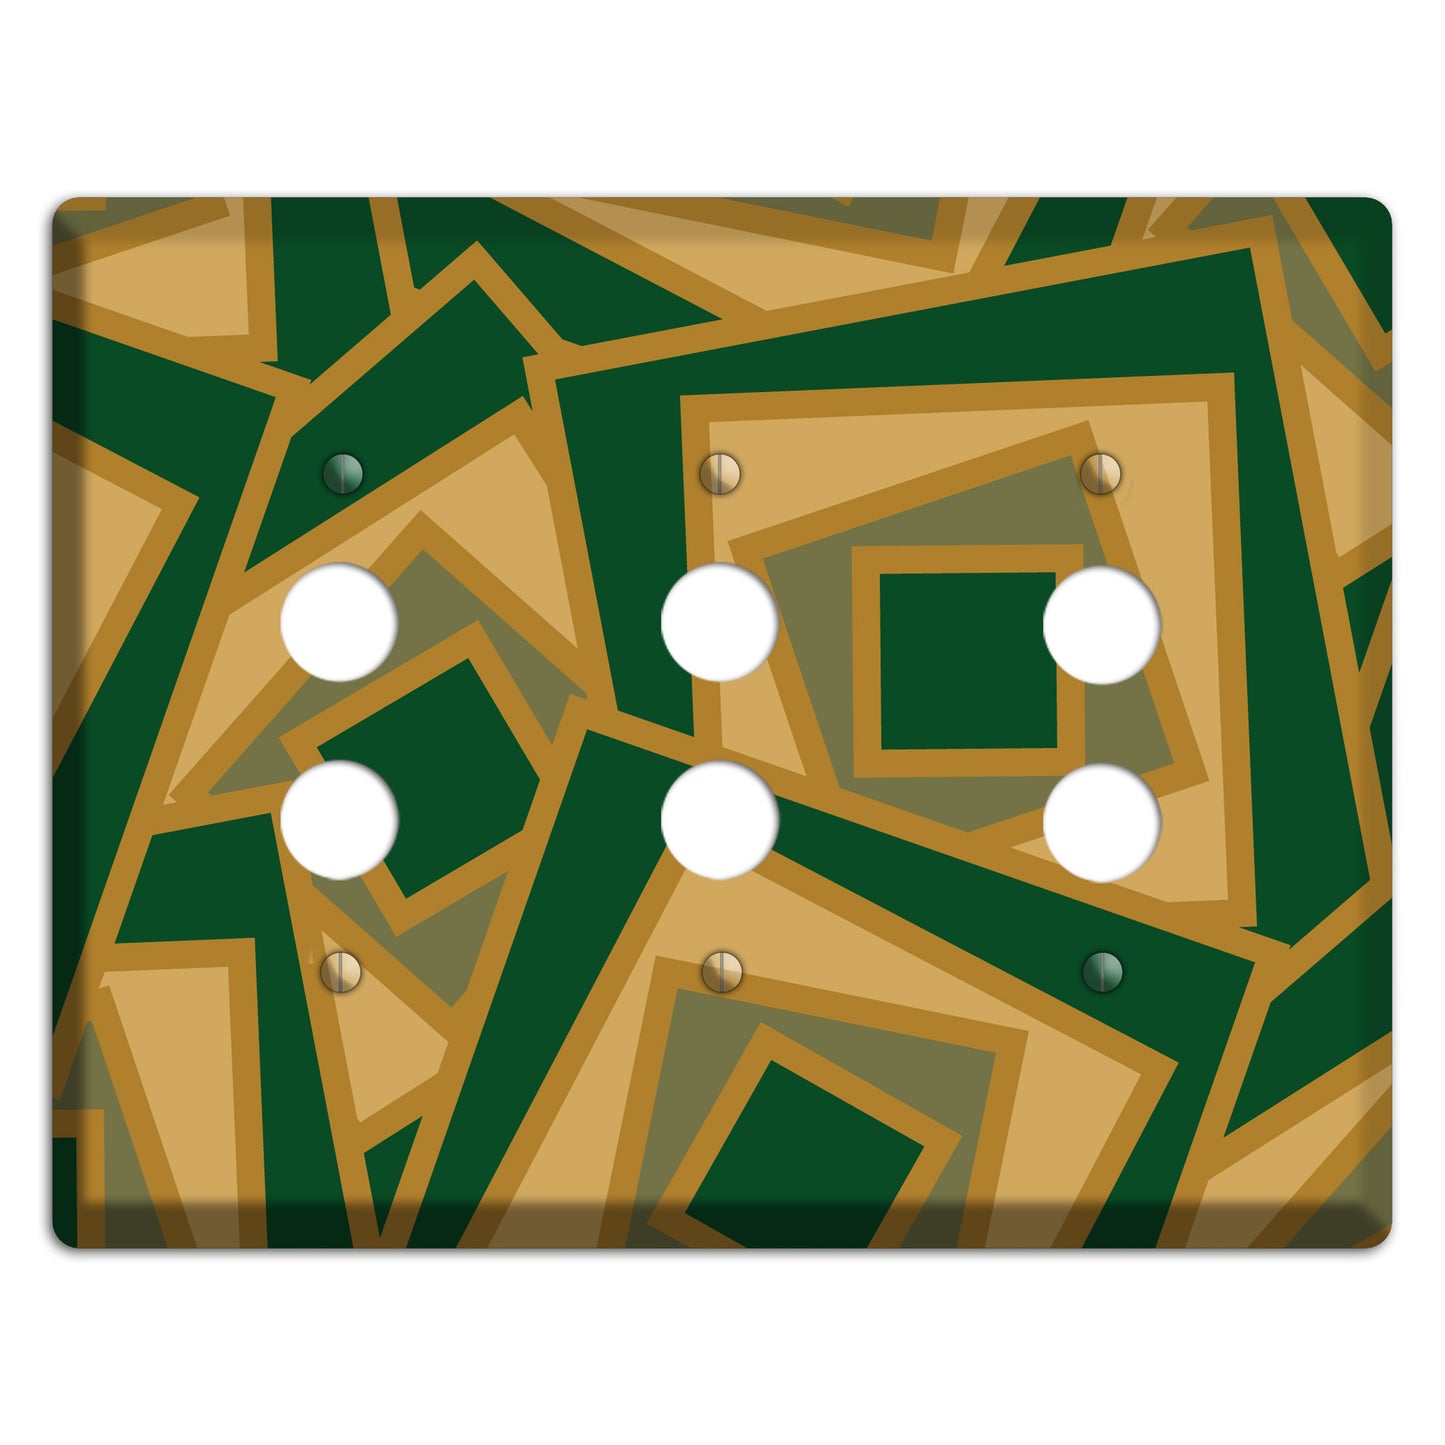 Green and Beige Retro Cubist 3 Pushbutton Wallplate